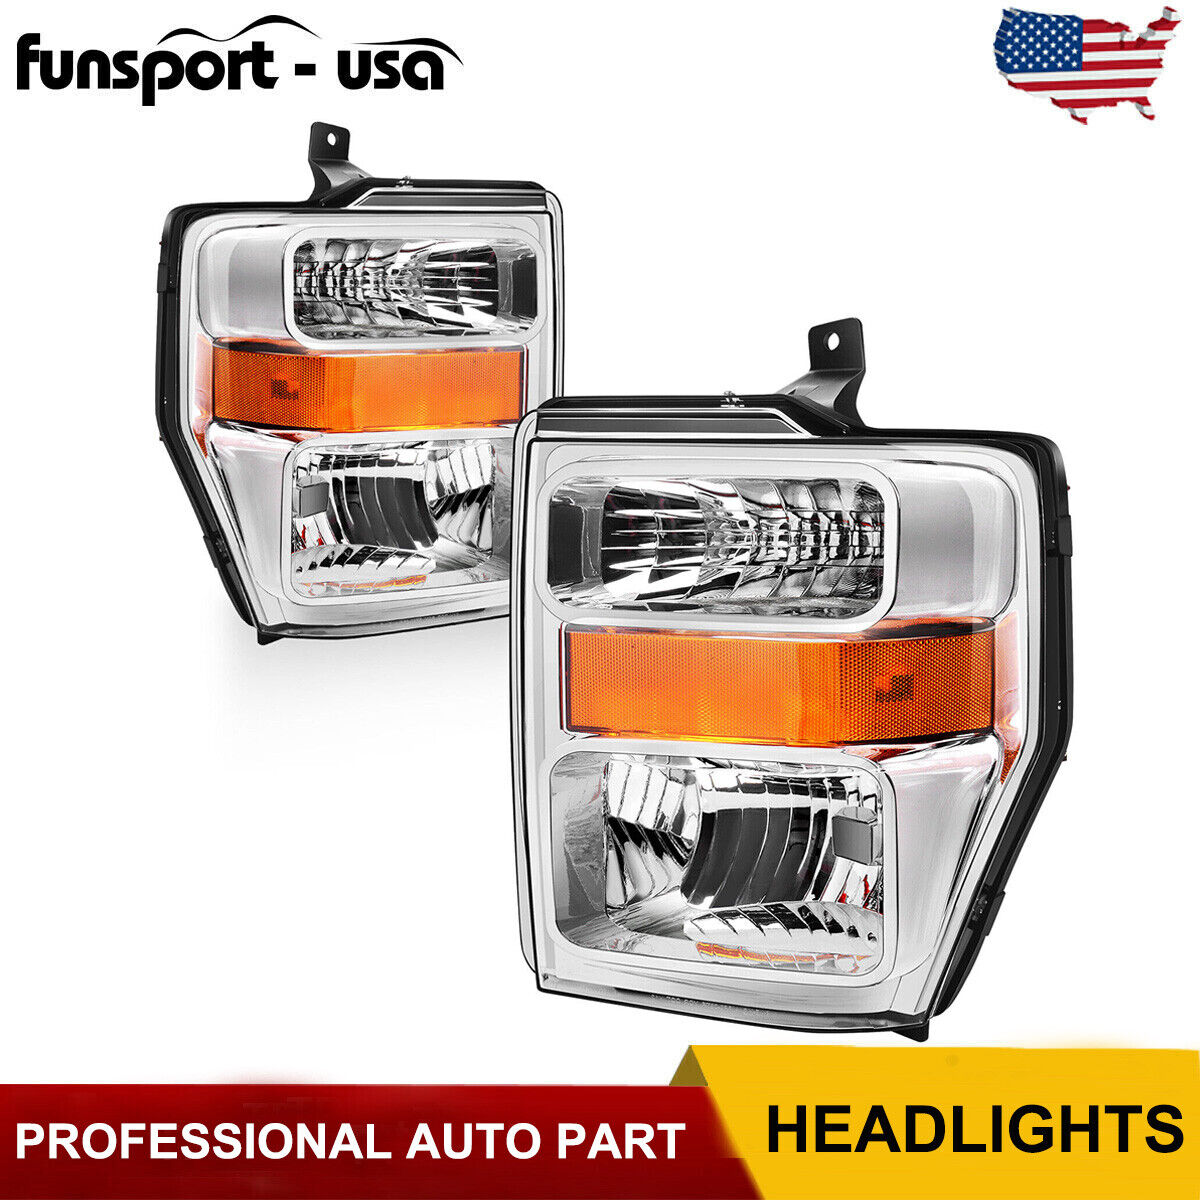 Fits For 2008-2010 Ford F250 F350 F450 Super Duty Pickup Headlights Lamps Pair